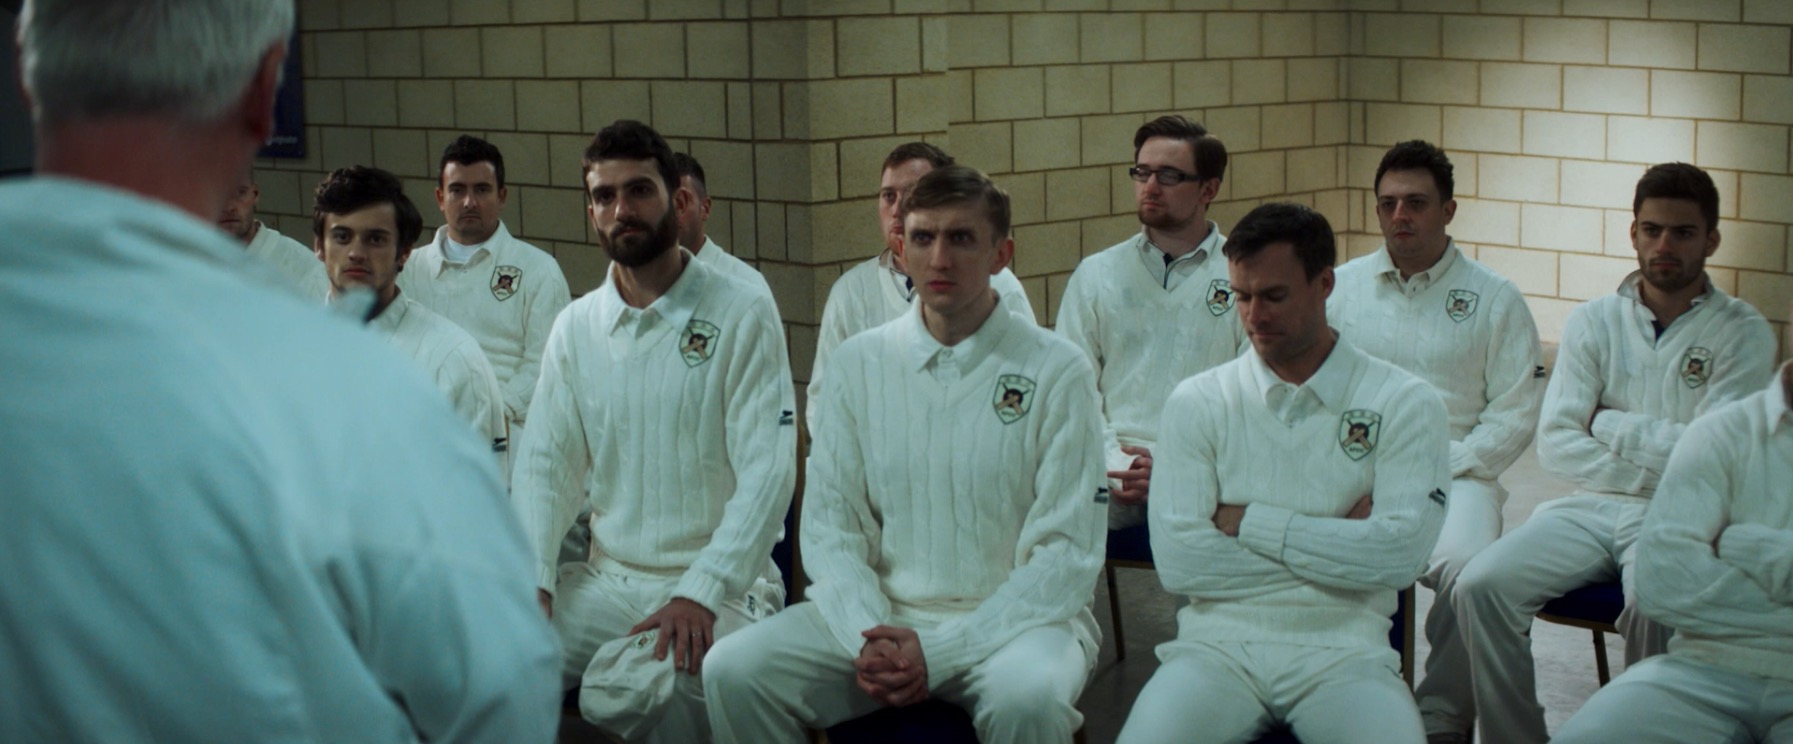 LS Productions Secures Edgbaston as Lufthansa Launches Cricket Themed Campaign